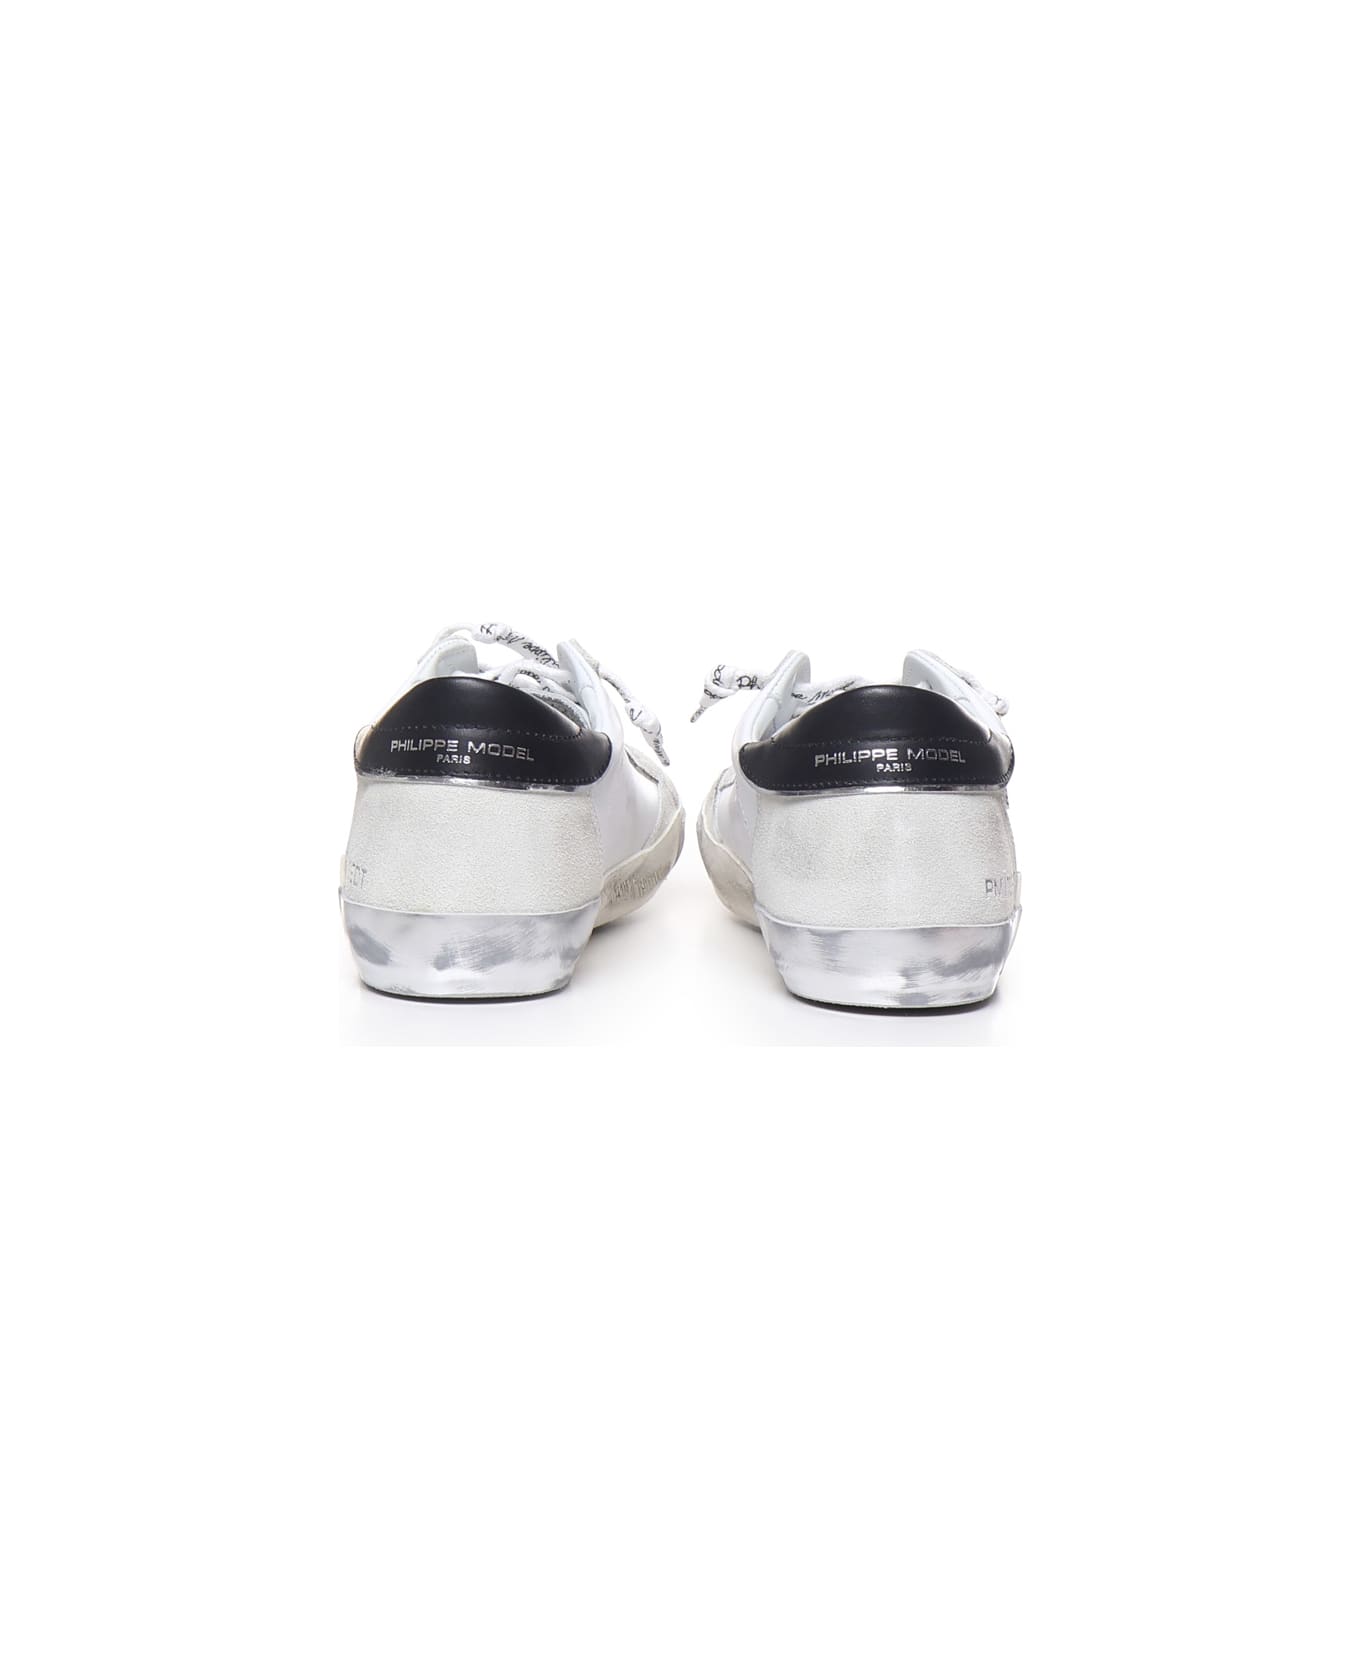 Philippe Model Parisx Sneakers In Leather With Contrasting Heel Tab - White